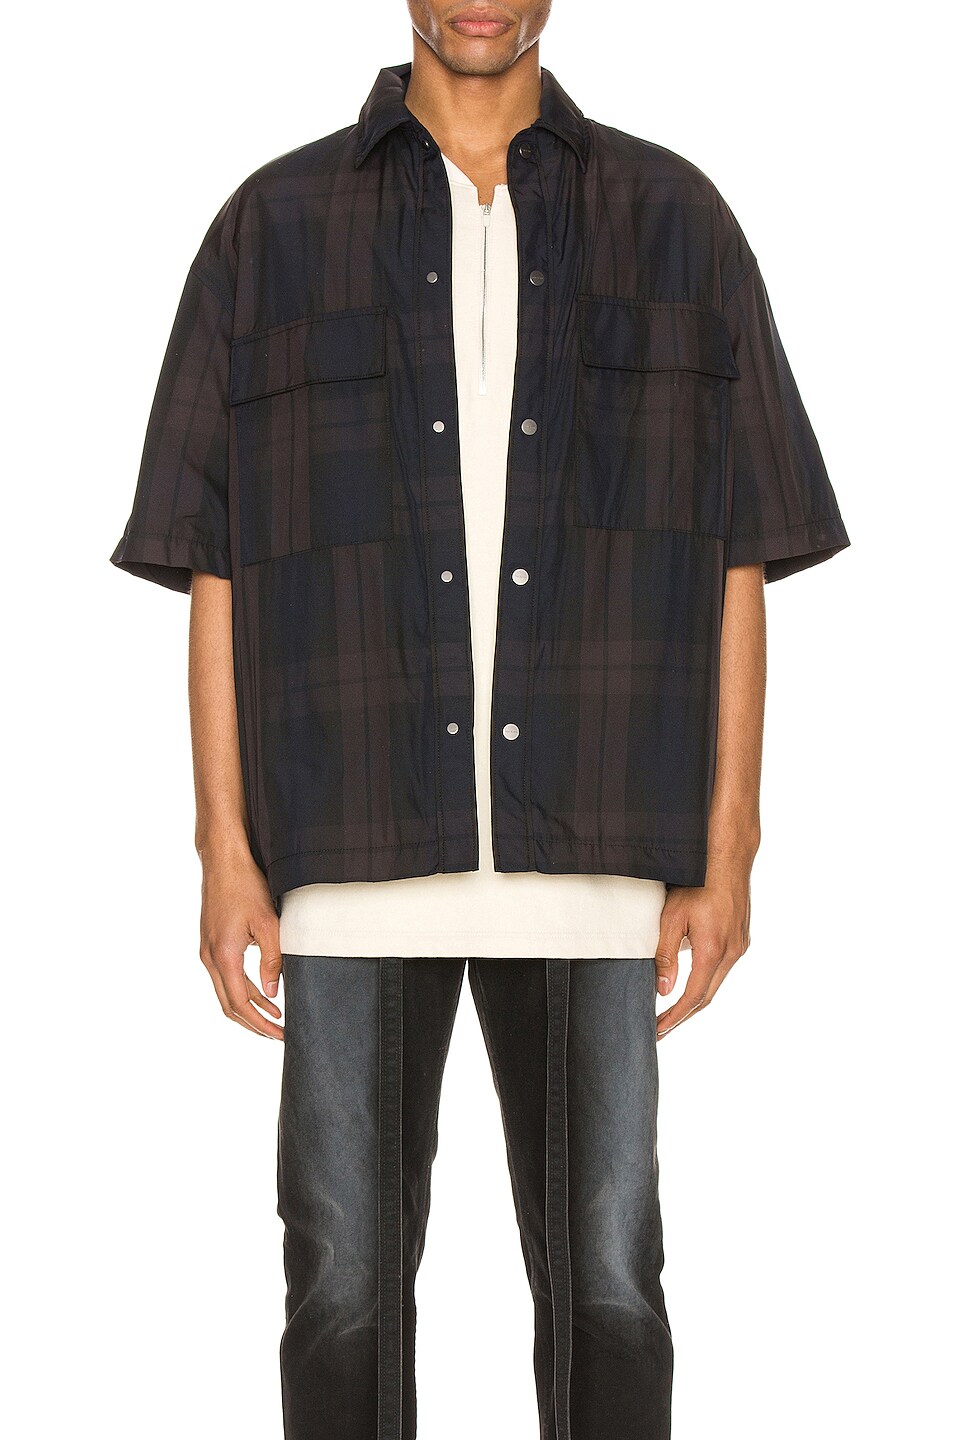 Image 1 of Fear of God Oversized Nylon Shirt in Navy & Brown Plaid